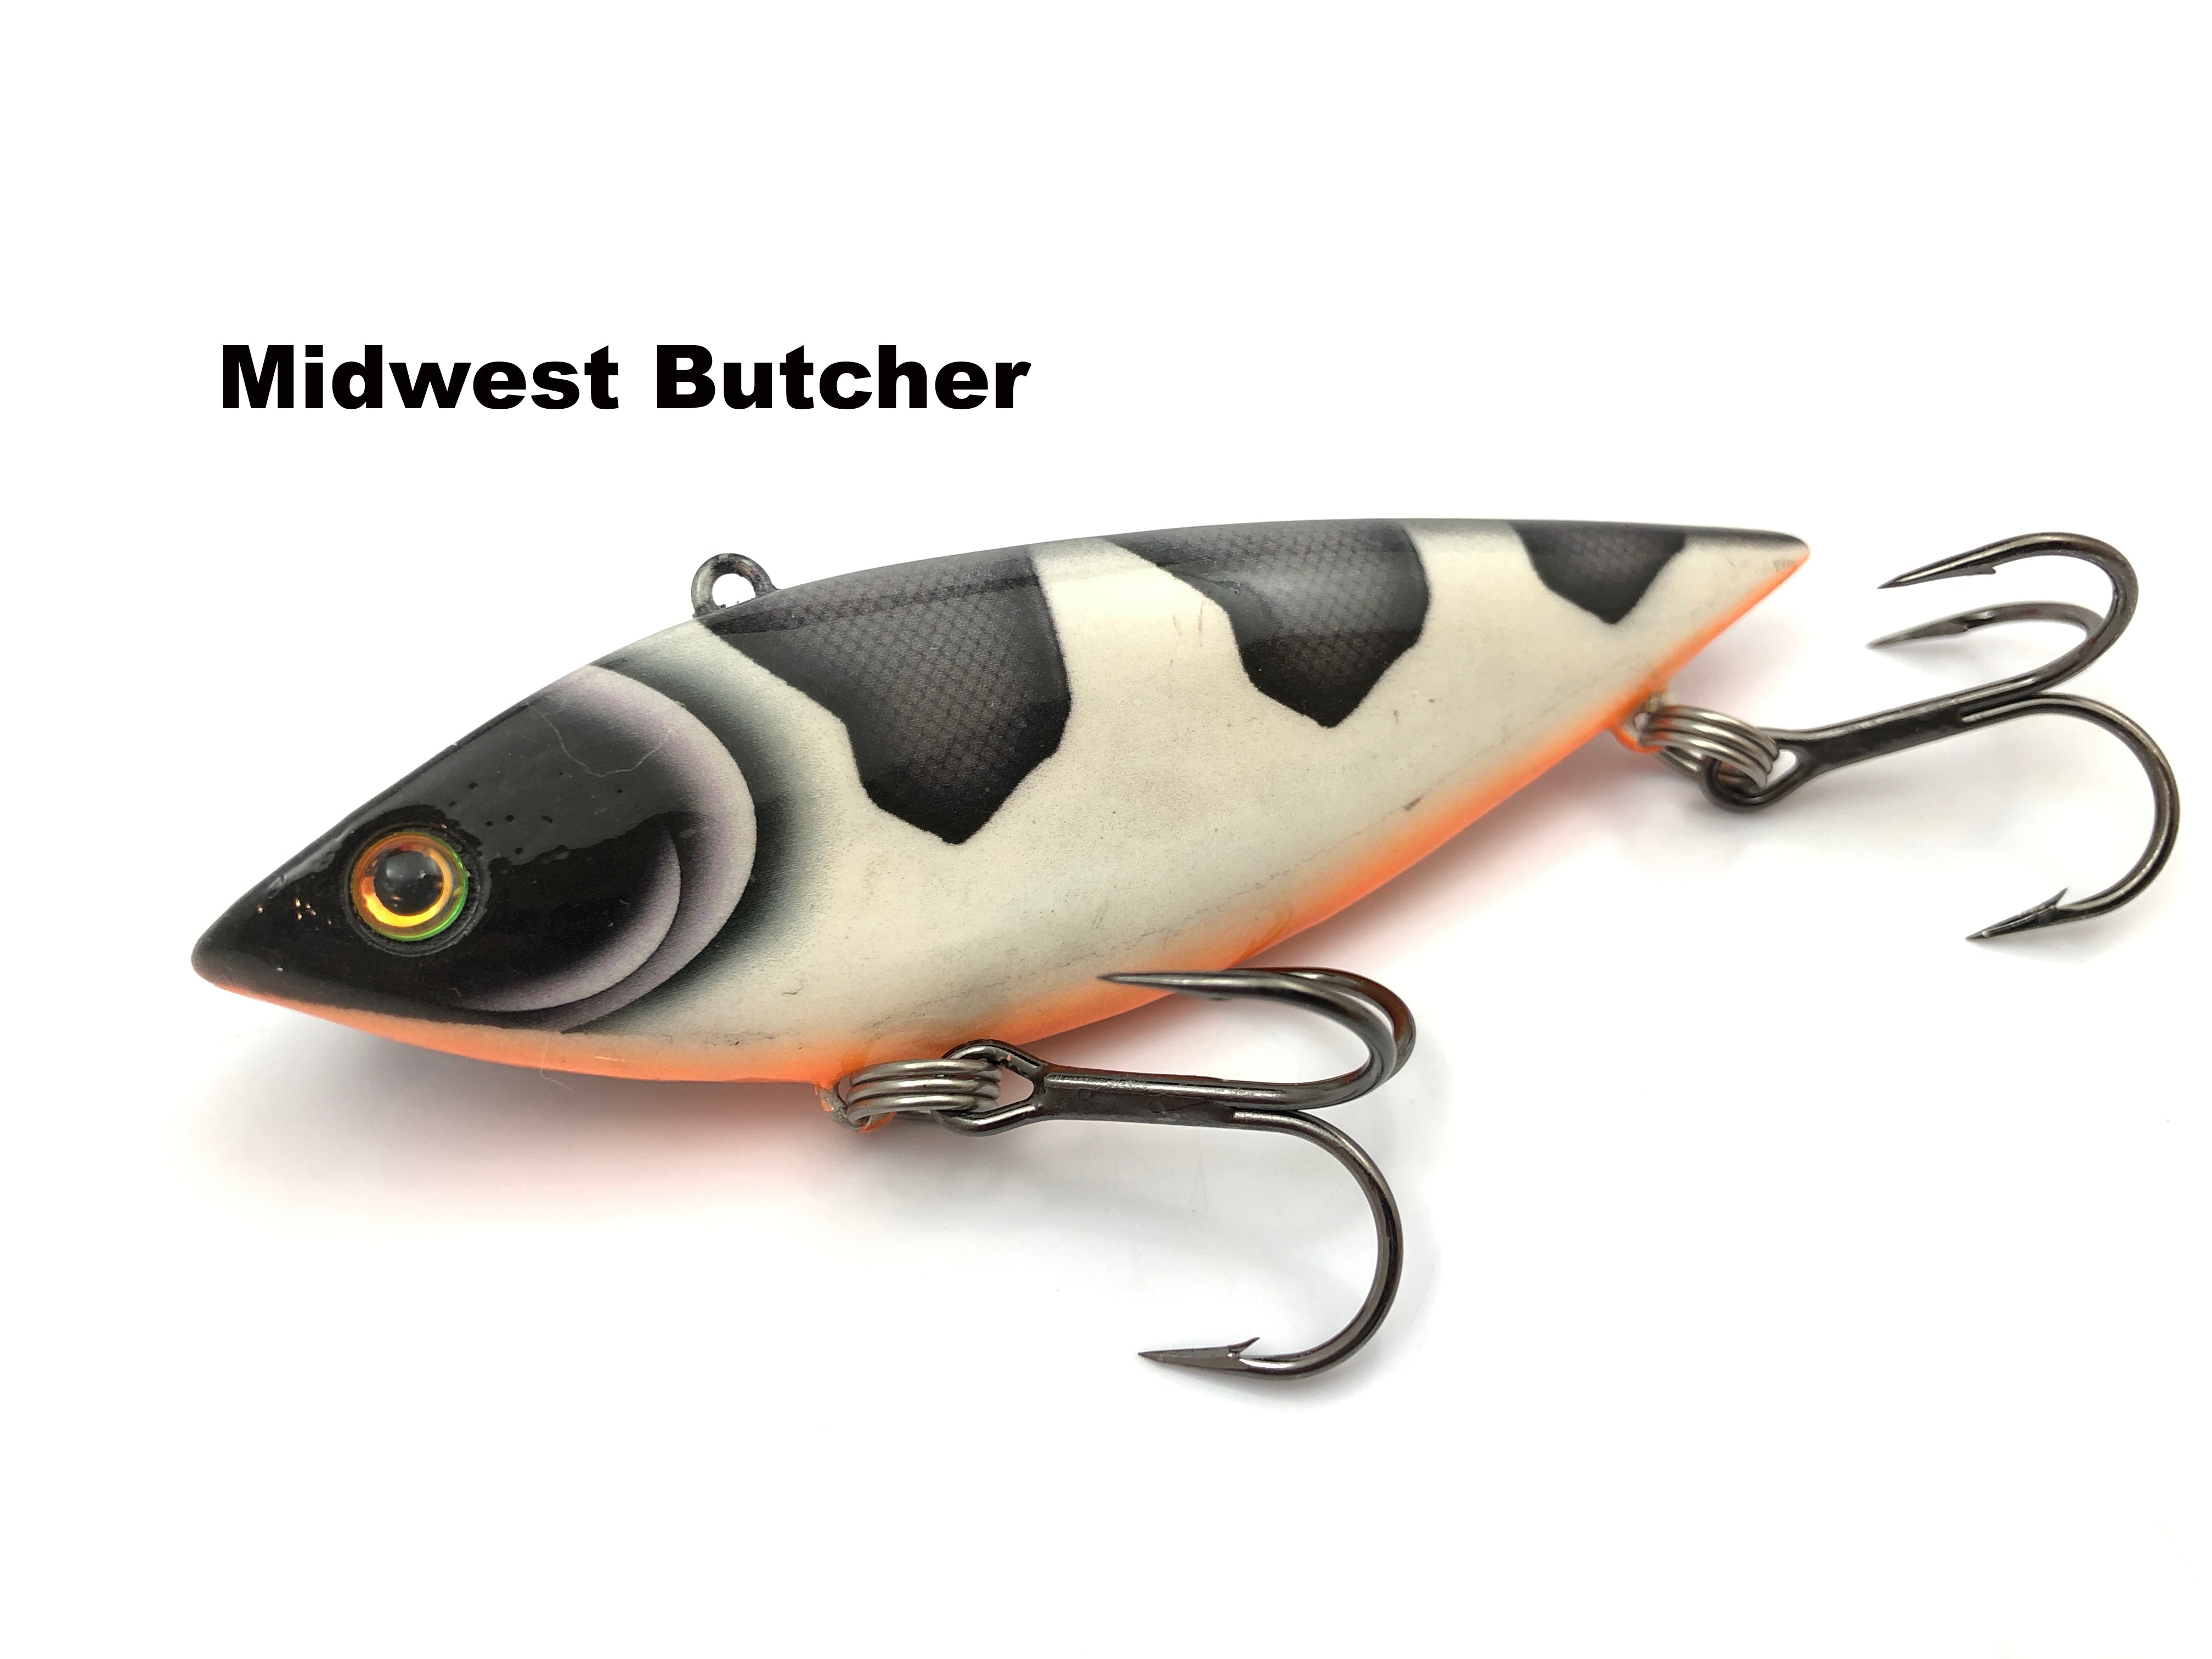 Rattletrap lure recipe sheet  Confessions of a fisherman, hunter